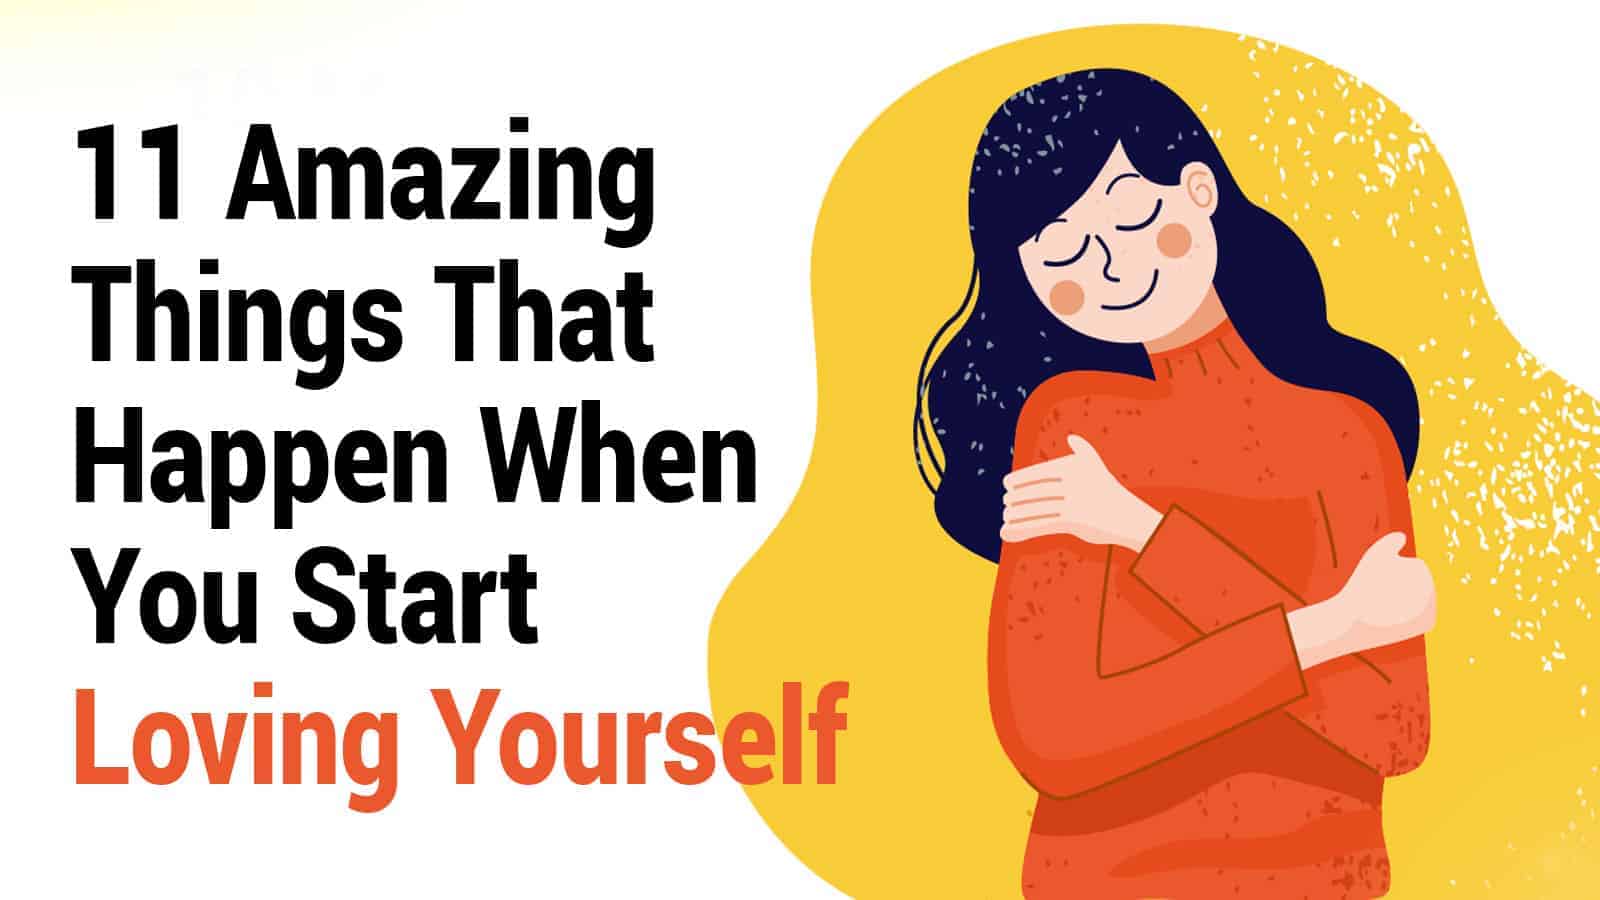 11 Amazing Things That Happen When You Start Loving Yourself